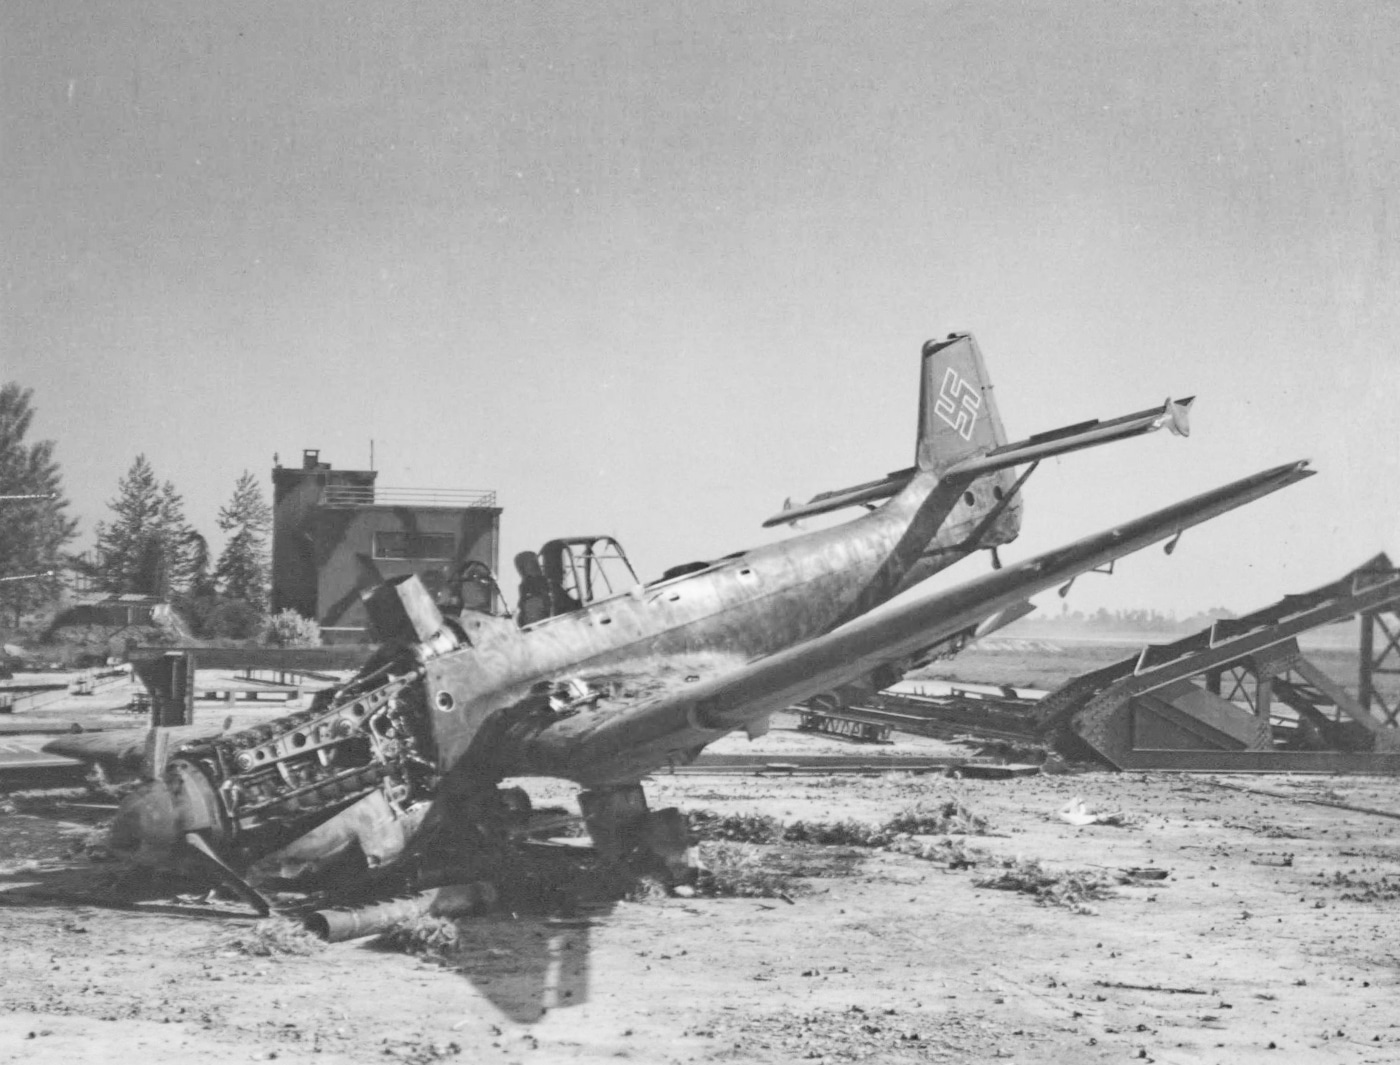 In this image, we see a heavily damaged Ju 87 on the ground. The airfield had been hit by a B-24 raid late in World War 2. The Consolidated B-24 Liberator is an American heavy bomber, designed by Consolidated Aircraft of San Diego, California. It was known within the company as the Model 32, and some initial production aircraft were laid down as export models designated as various LB-30s, in the Land Bomber design category.